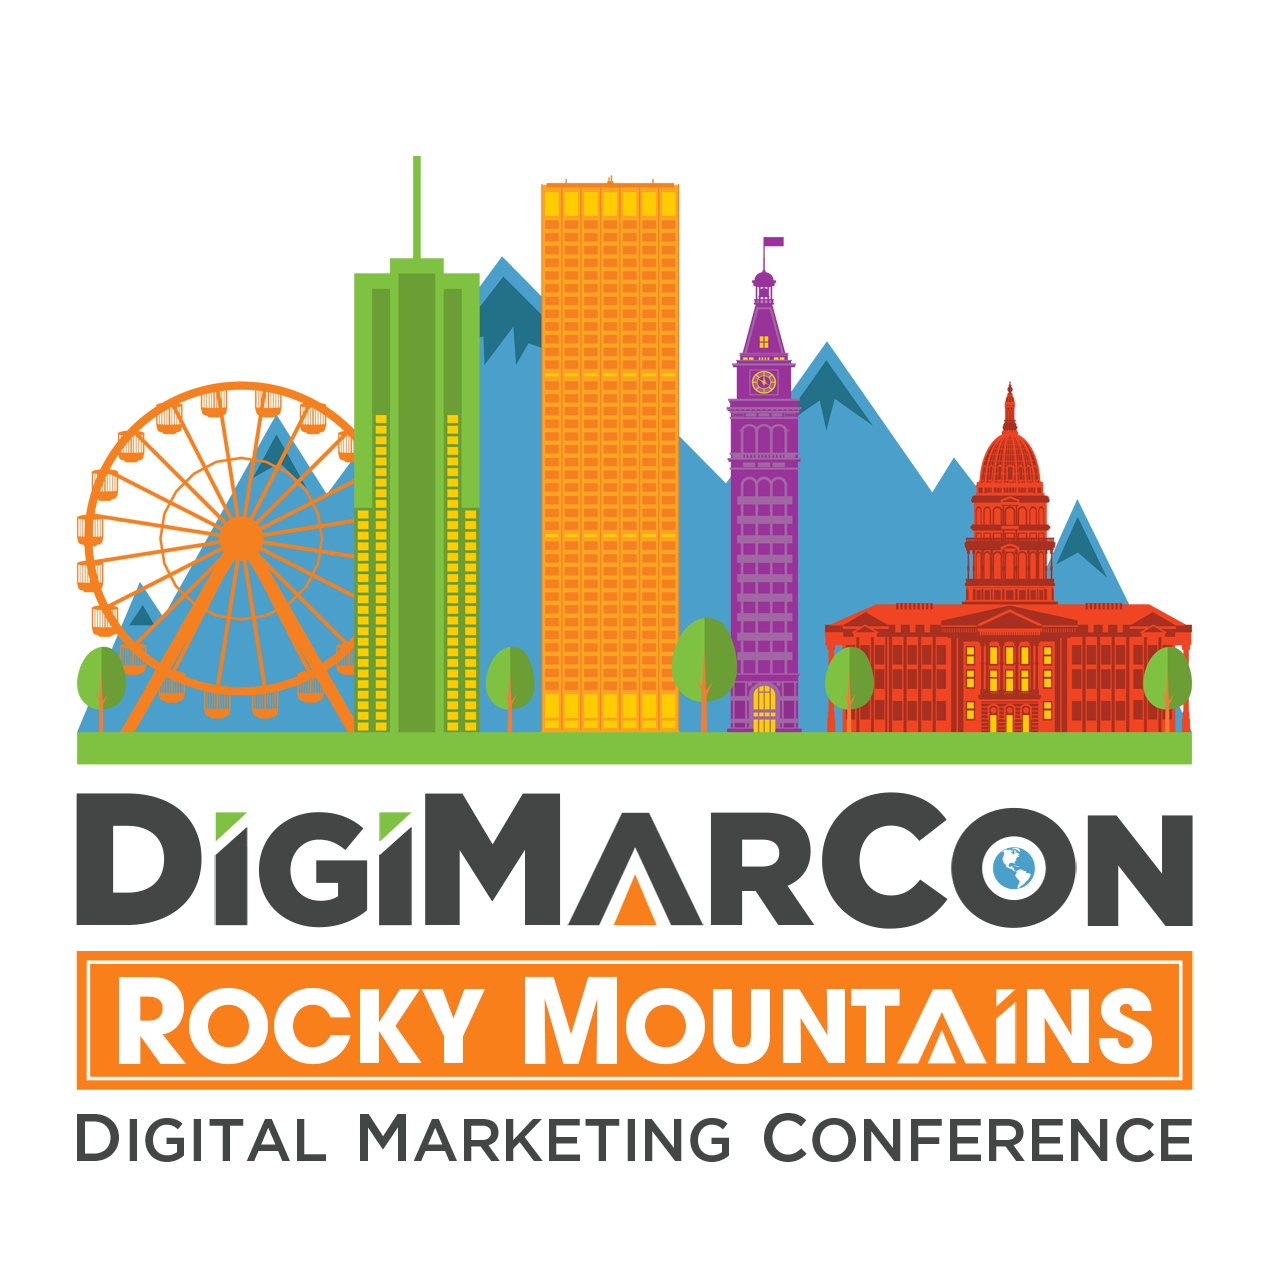 DigiMarCon Rocky Mountains 2022 - Digital Marketing, Media and Advertising Conference & Exhibition, Denver, Colorado, United States